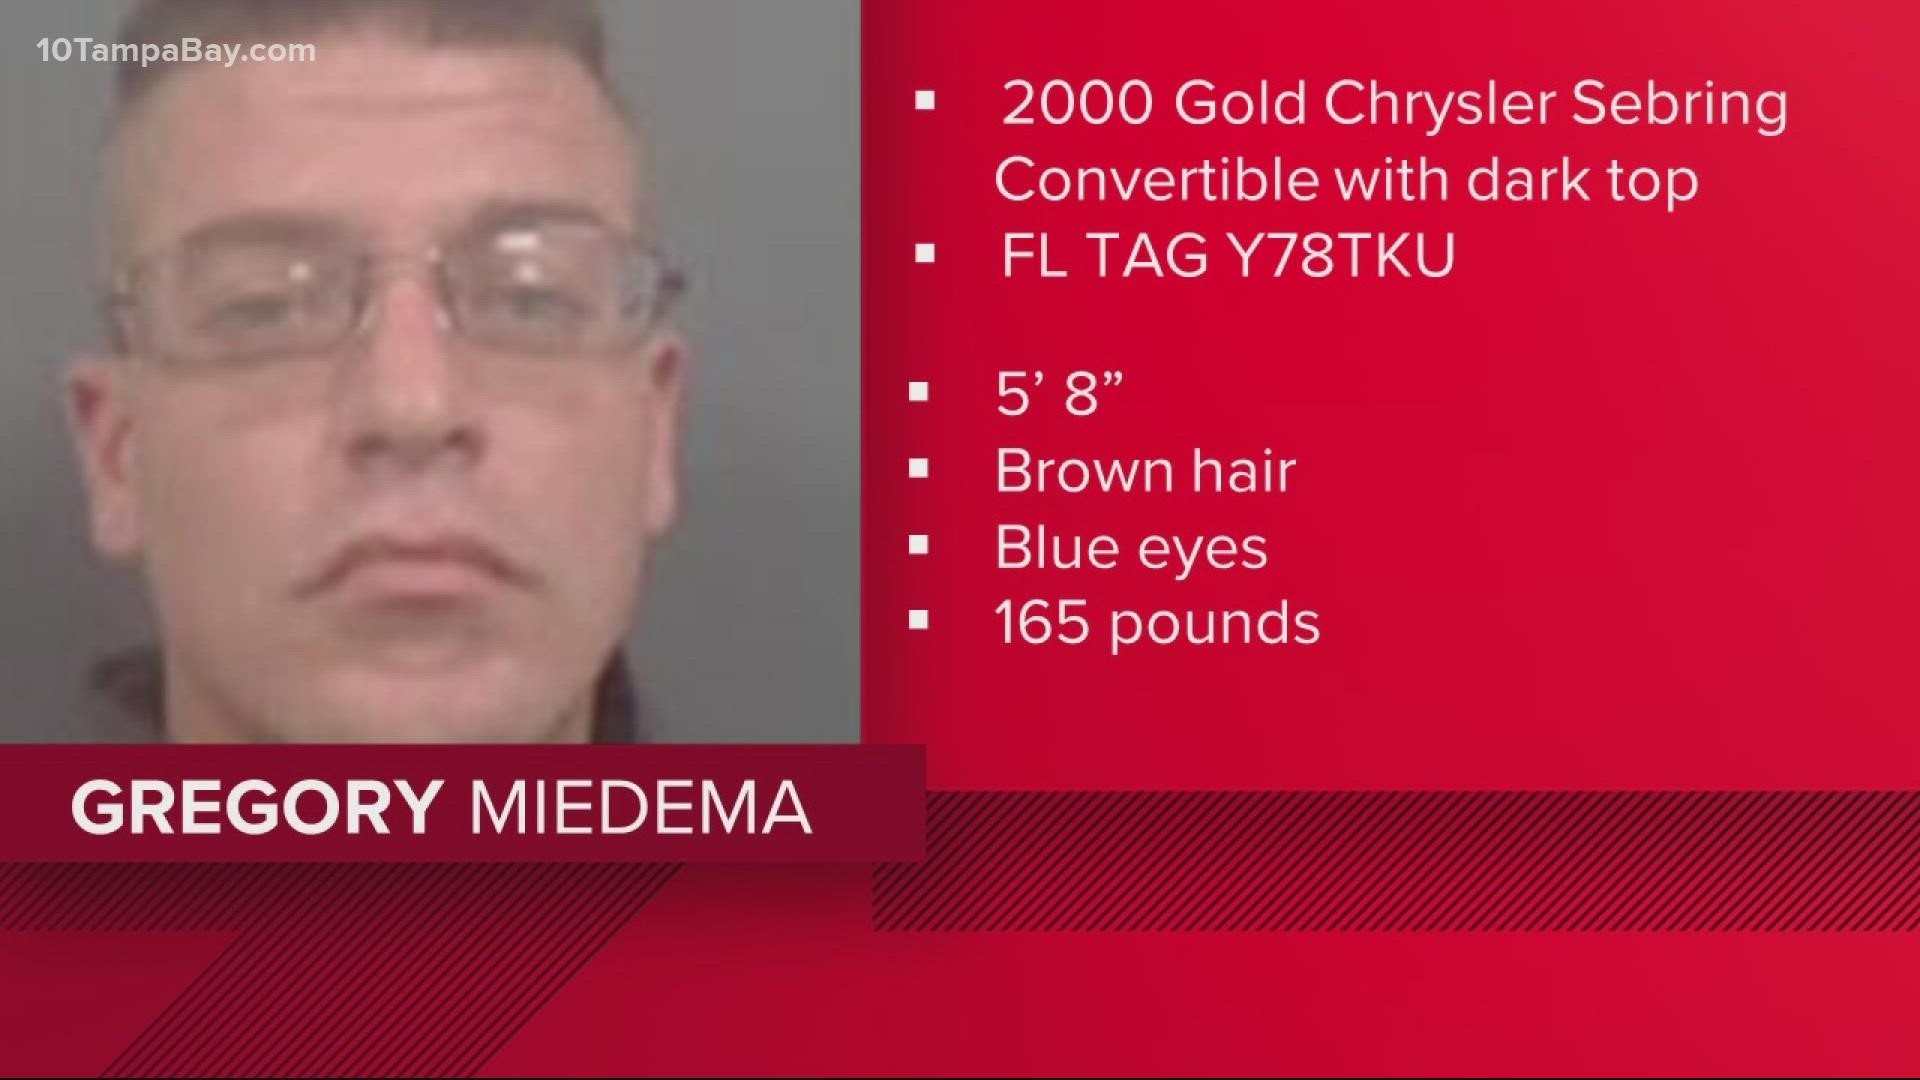 The Florida Department of Law Enforcement has issued a Florida Blue Alert for Miedema, 33, last seen near U.S.-19 South Deer Run Road in Perry, Florida.